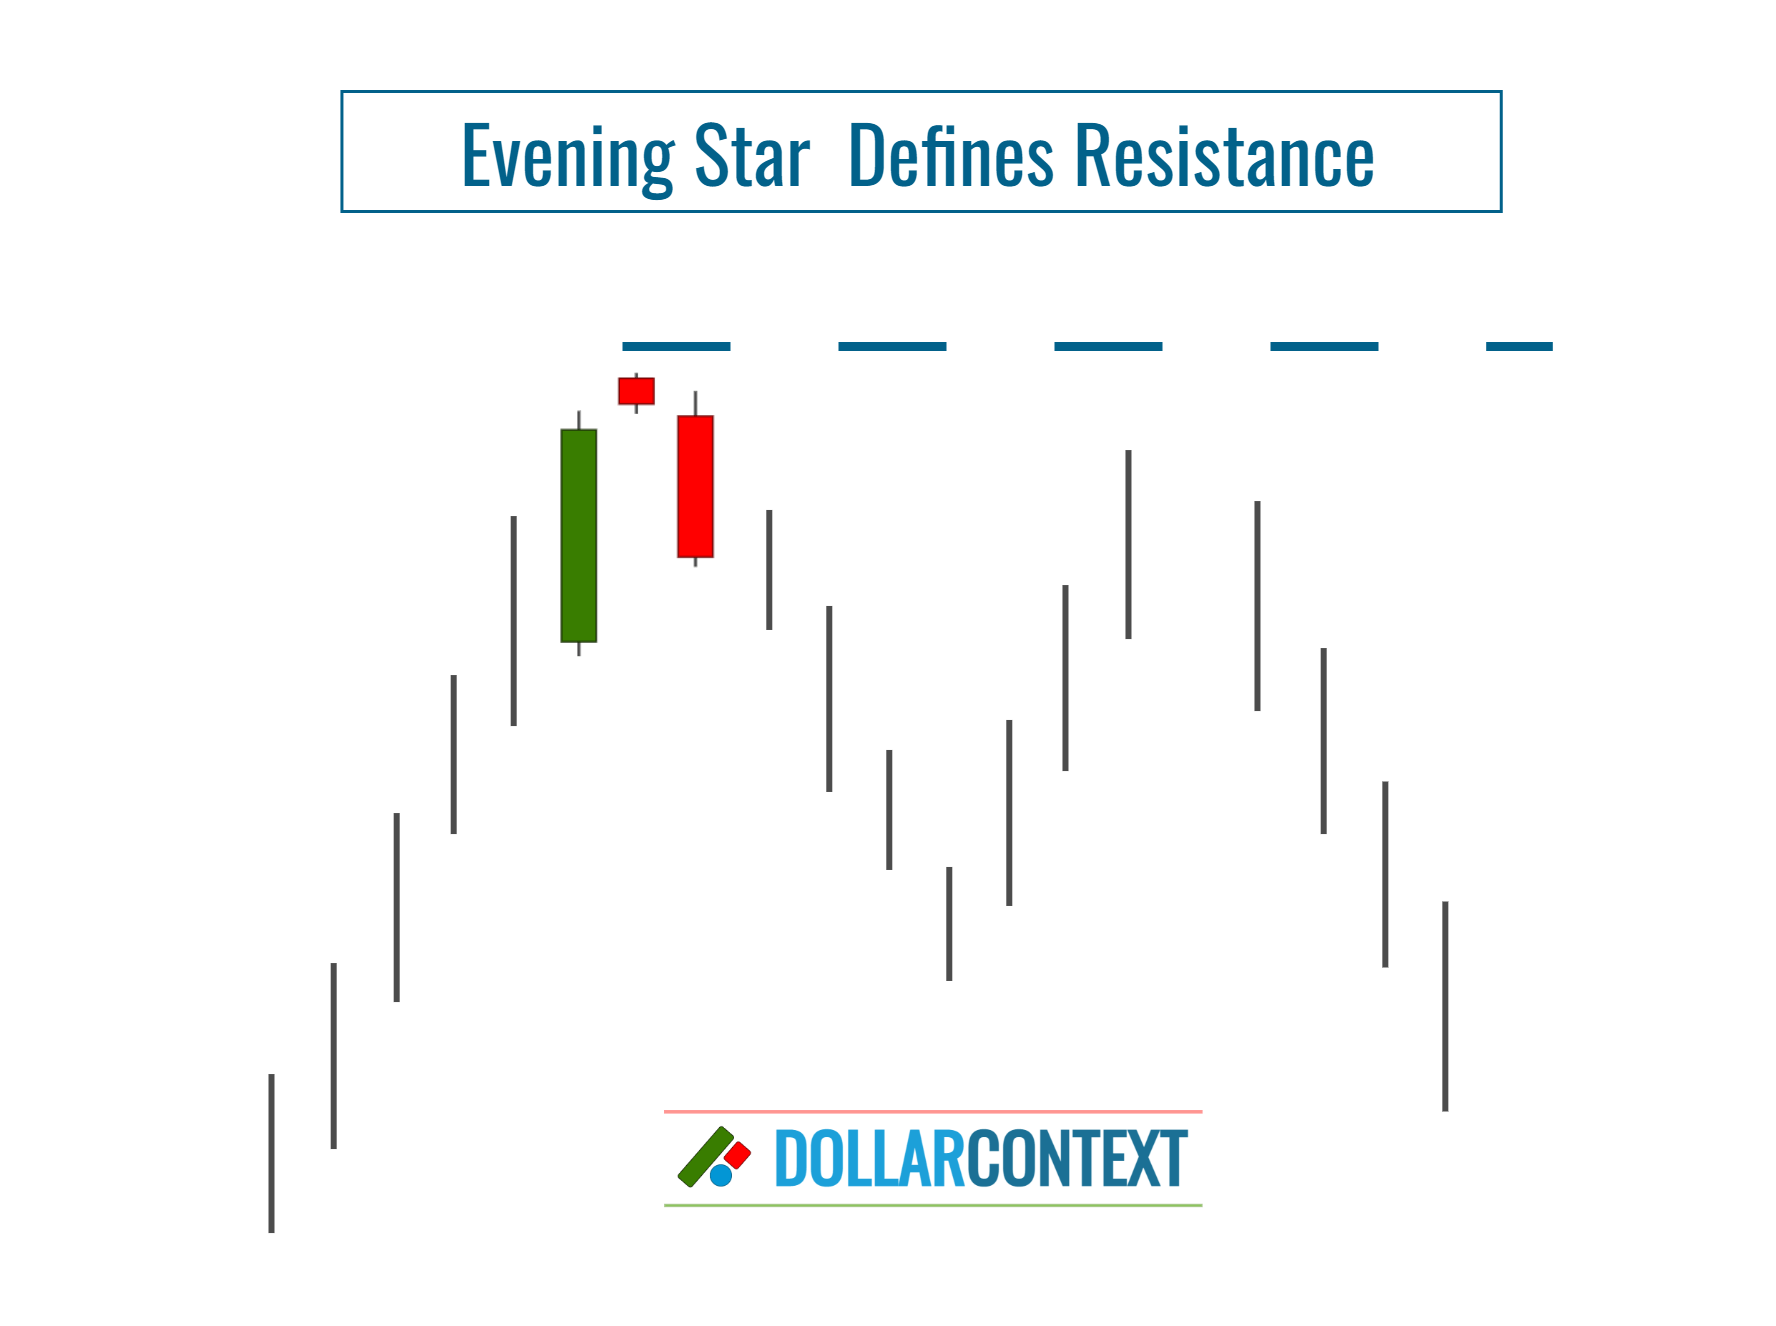 Evening Star Defines a New Resistance Zone